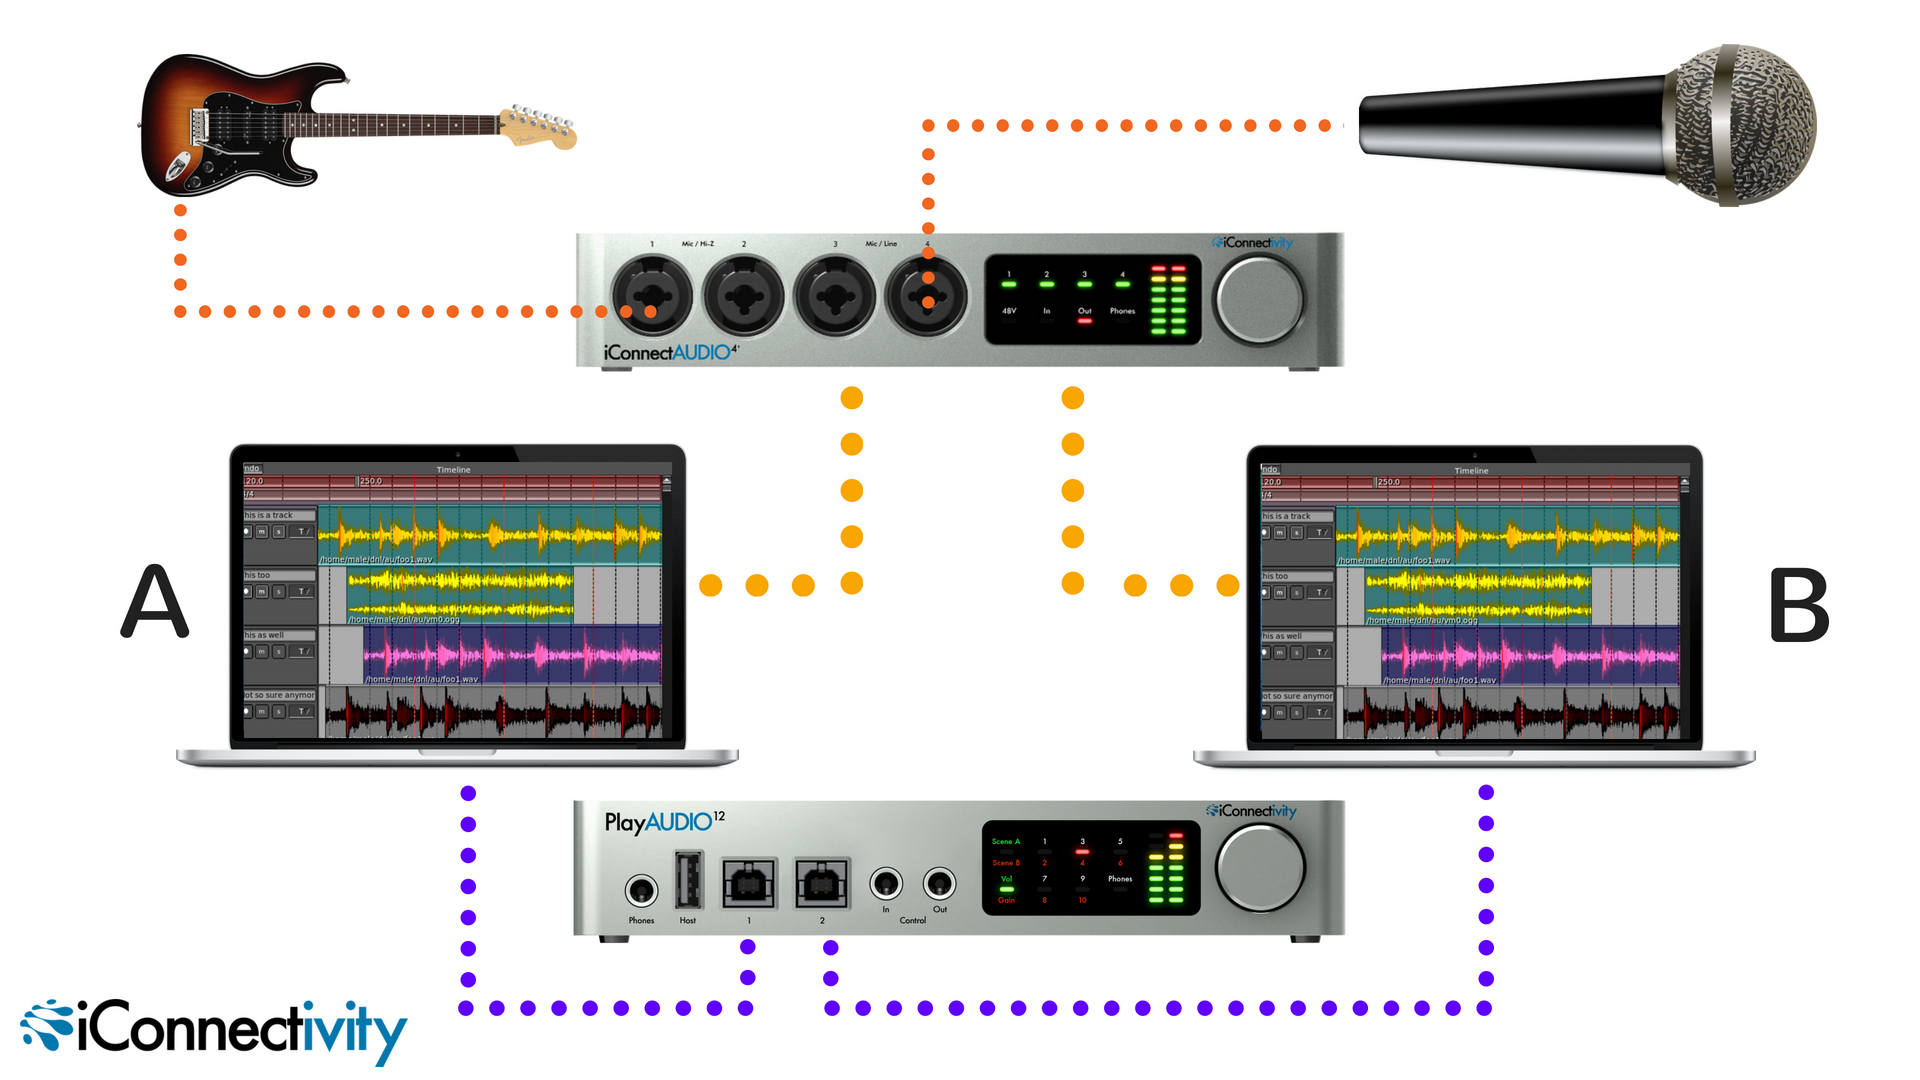  Adding redundant inputs is simple and easy with the iConnectAUDIO4+ Dark orange lines show the inputs (in this case a guitar and a microphone). Use iConnectivity's control software to route your inputs to both computer connections, shown here as the lighter orange lines. Your PlayAUDIO12 then connects in the normal manner (purple lines), just be sure to set your DAW's inputs on both machines to accept the outputs from the iConnectAUDIO4+ 